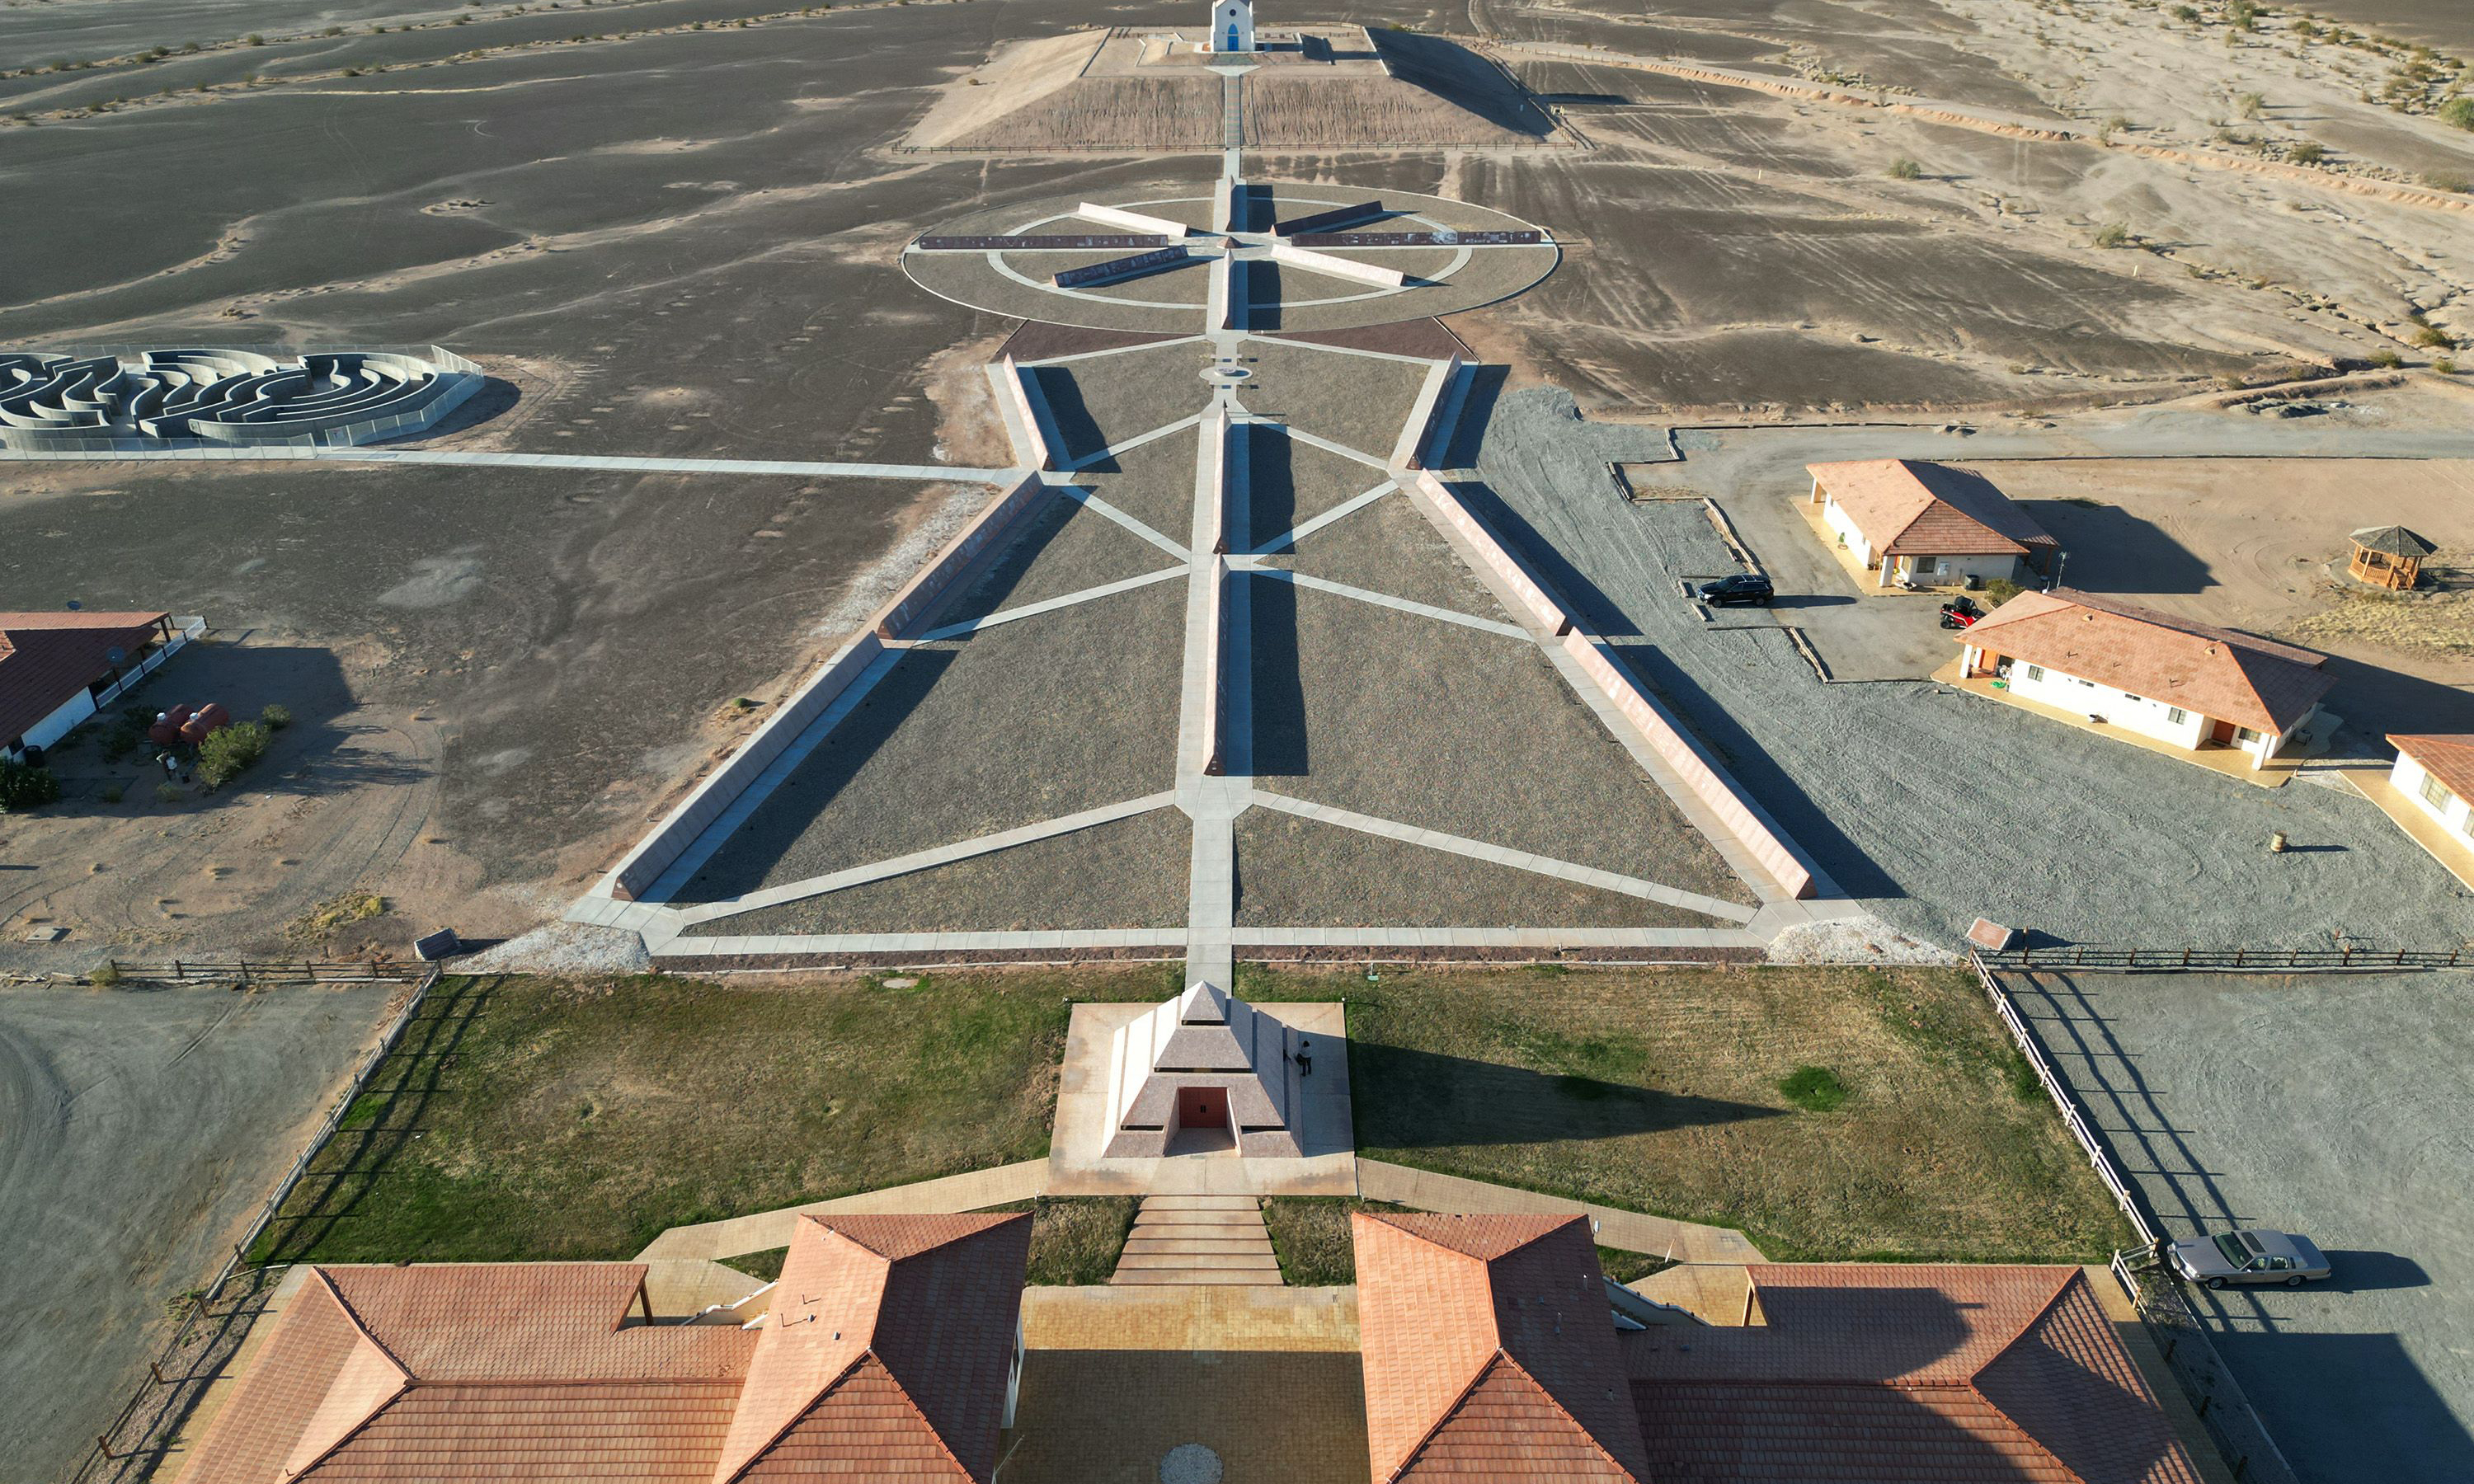 An aerial view of the tiny town of Felicity, home of The Museum of History in Granite, The Church on the Hill and a 21-foot-tall stone-and-glass pyramid marking the “Official Center of the World.” The tiny town of Felicity, which borders Yuma, Arizona and Mexico, was founded by French-American Jacques-Andre Istel, 94, and is the home of Istel’s passion project, the Museum of History in Granite. — AFP photos